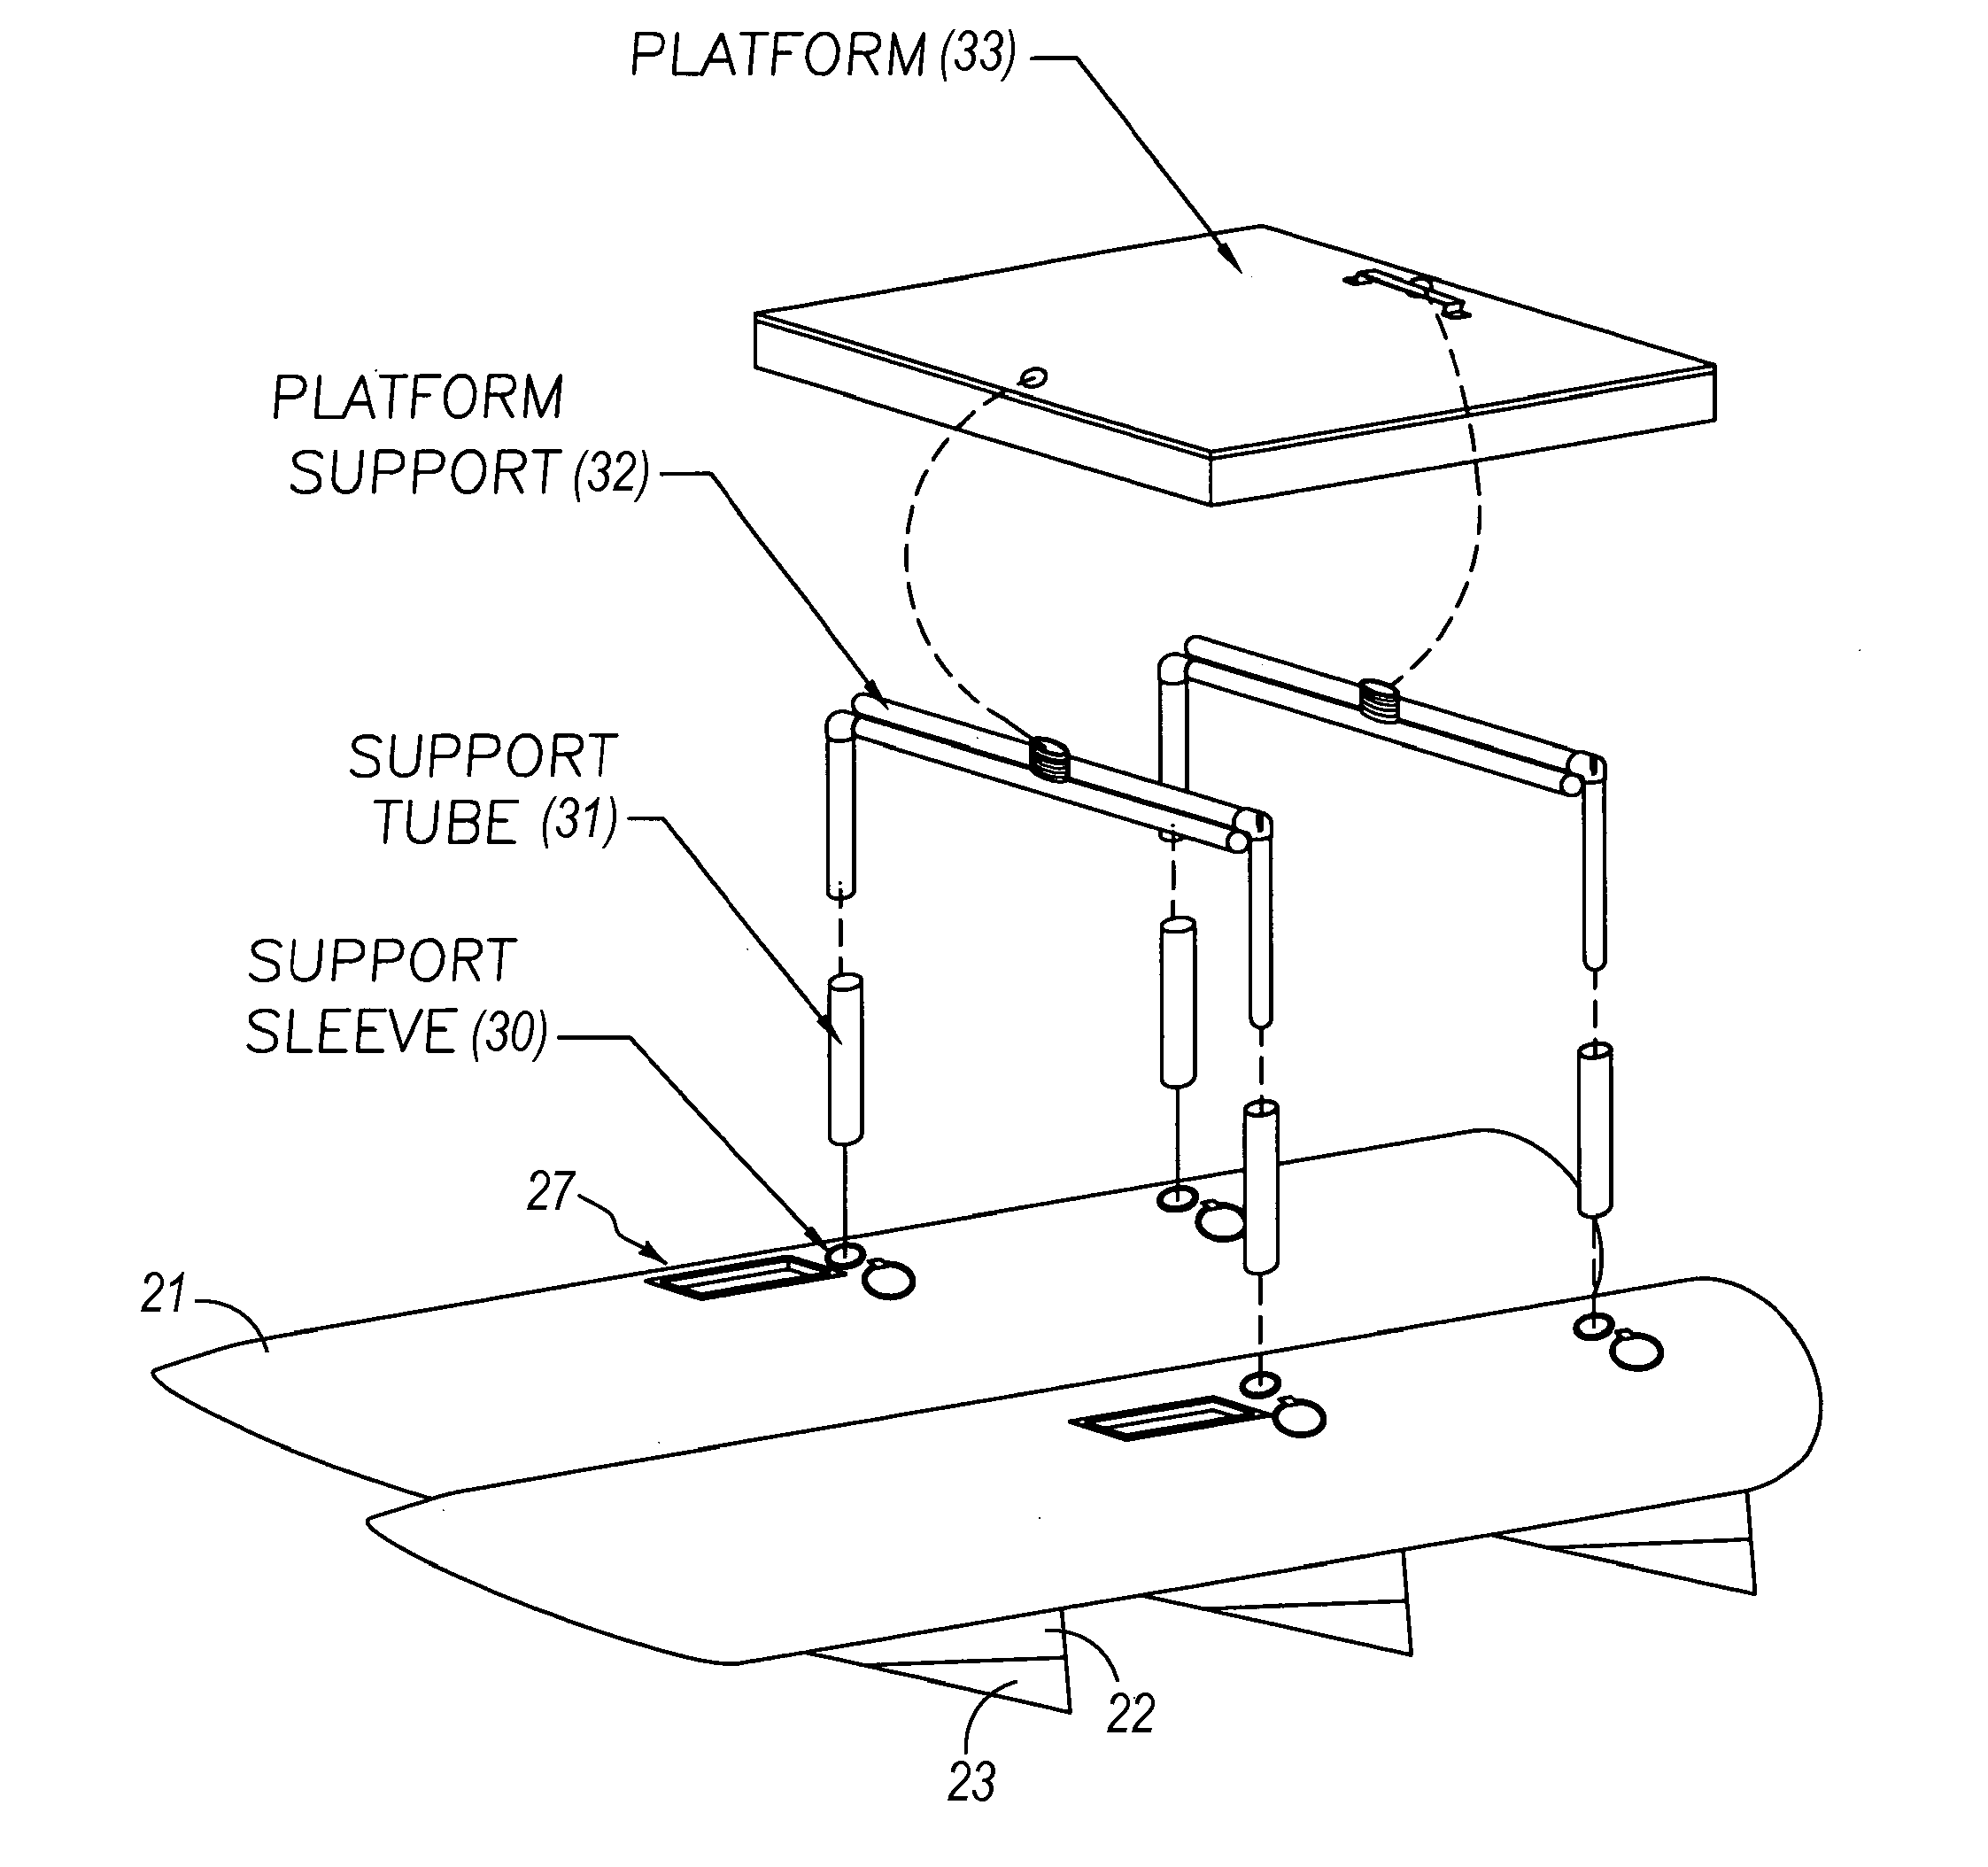 Apparatus for walking and resting upon the water